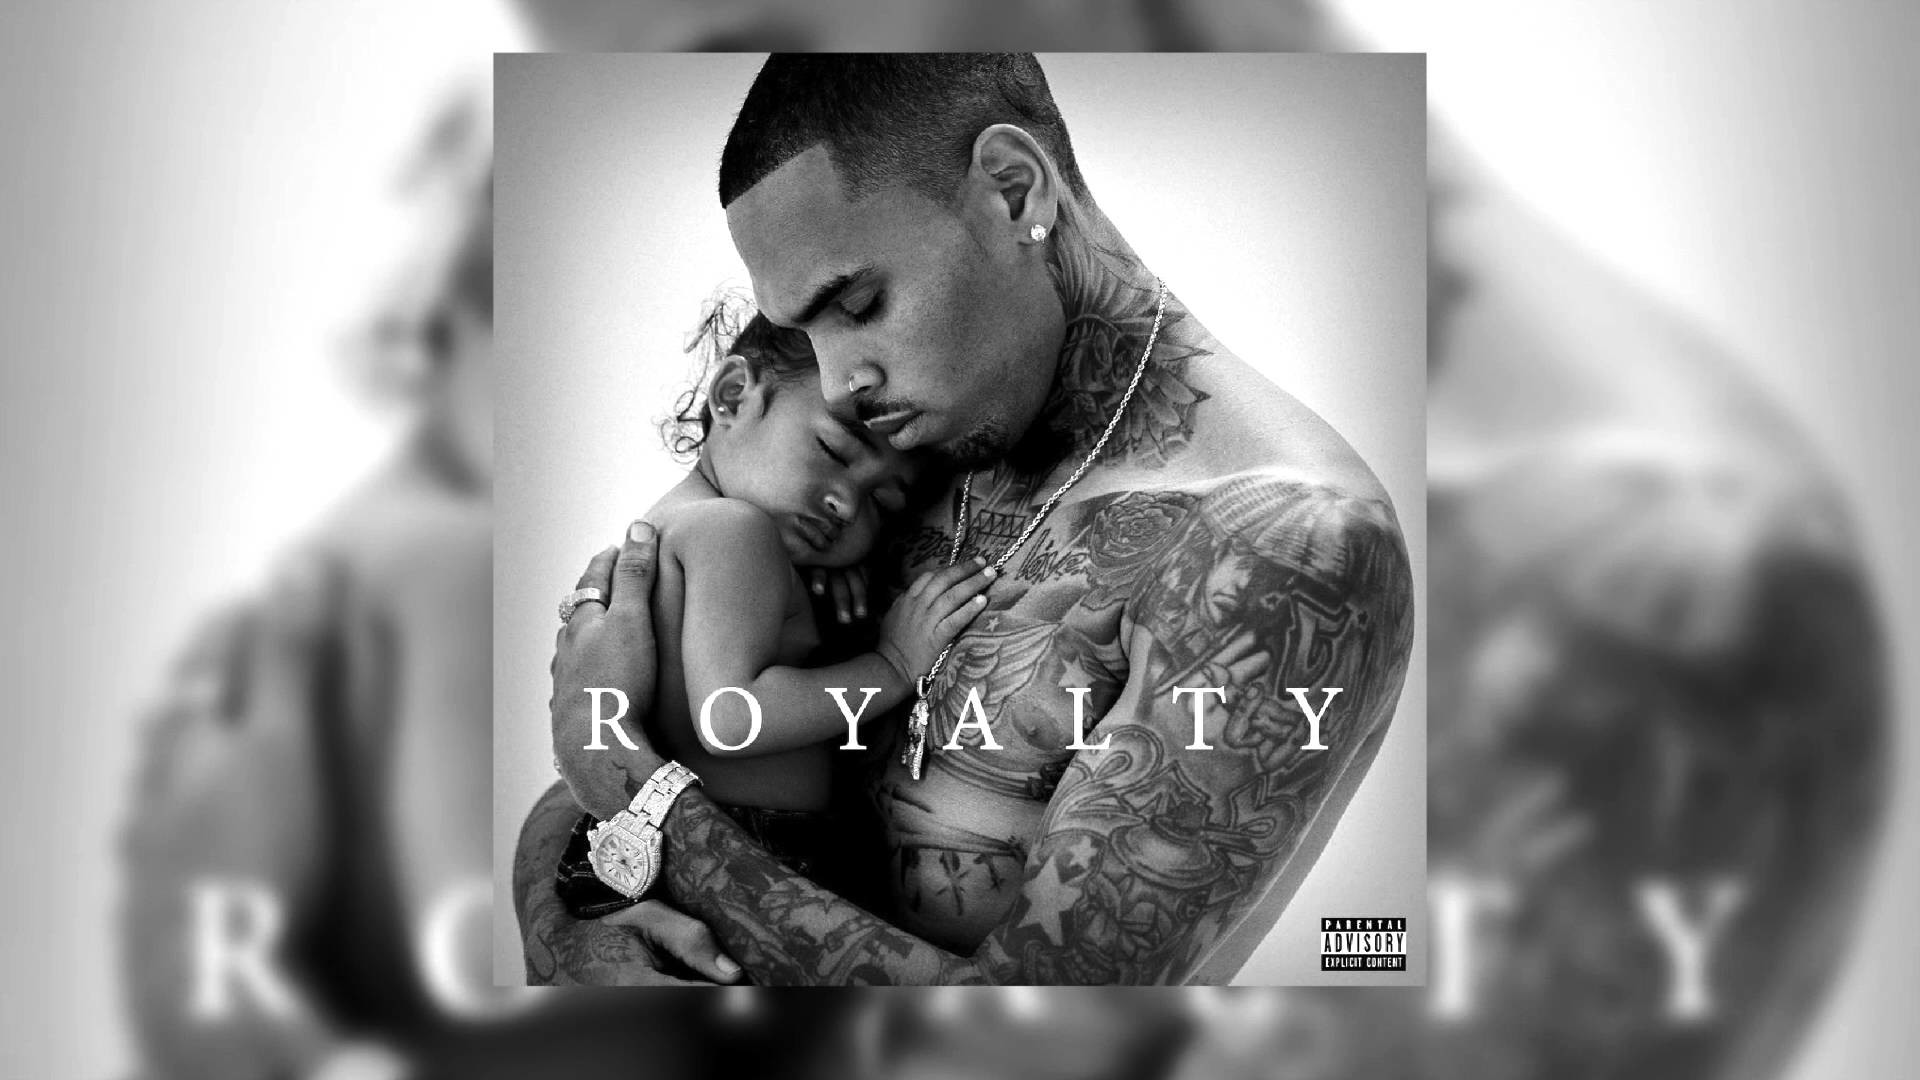 1920x1080 Royalty | Chris Brown Type Beat [Prod. By Dranzition] - YouTube